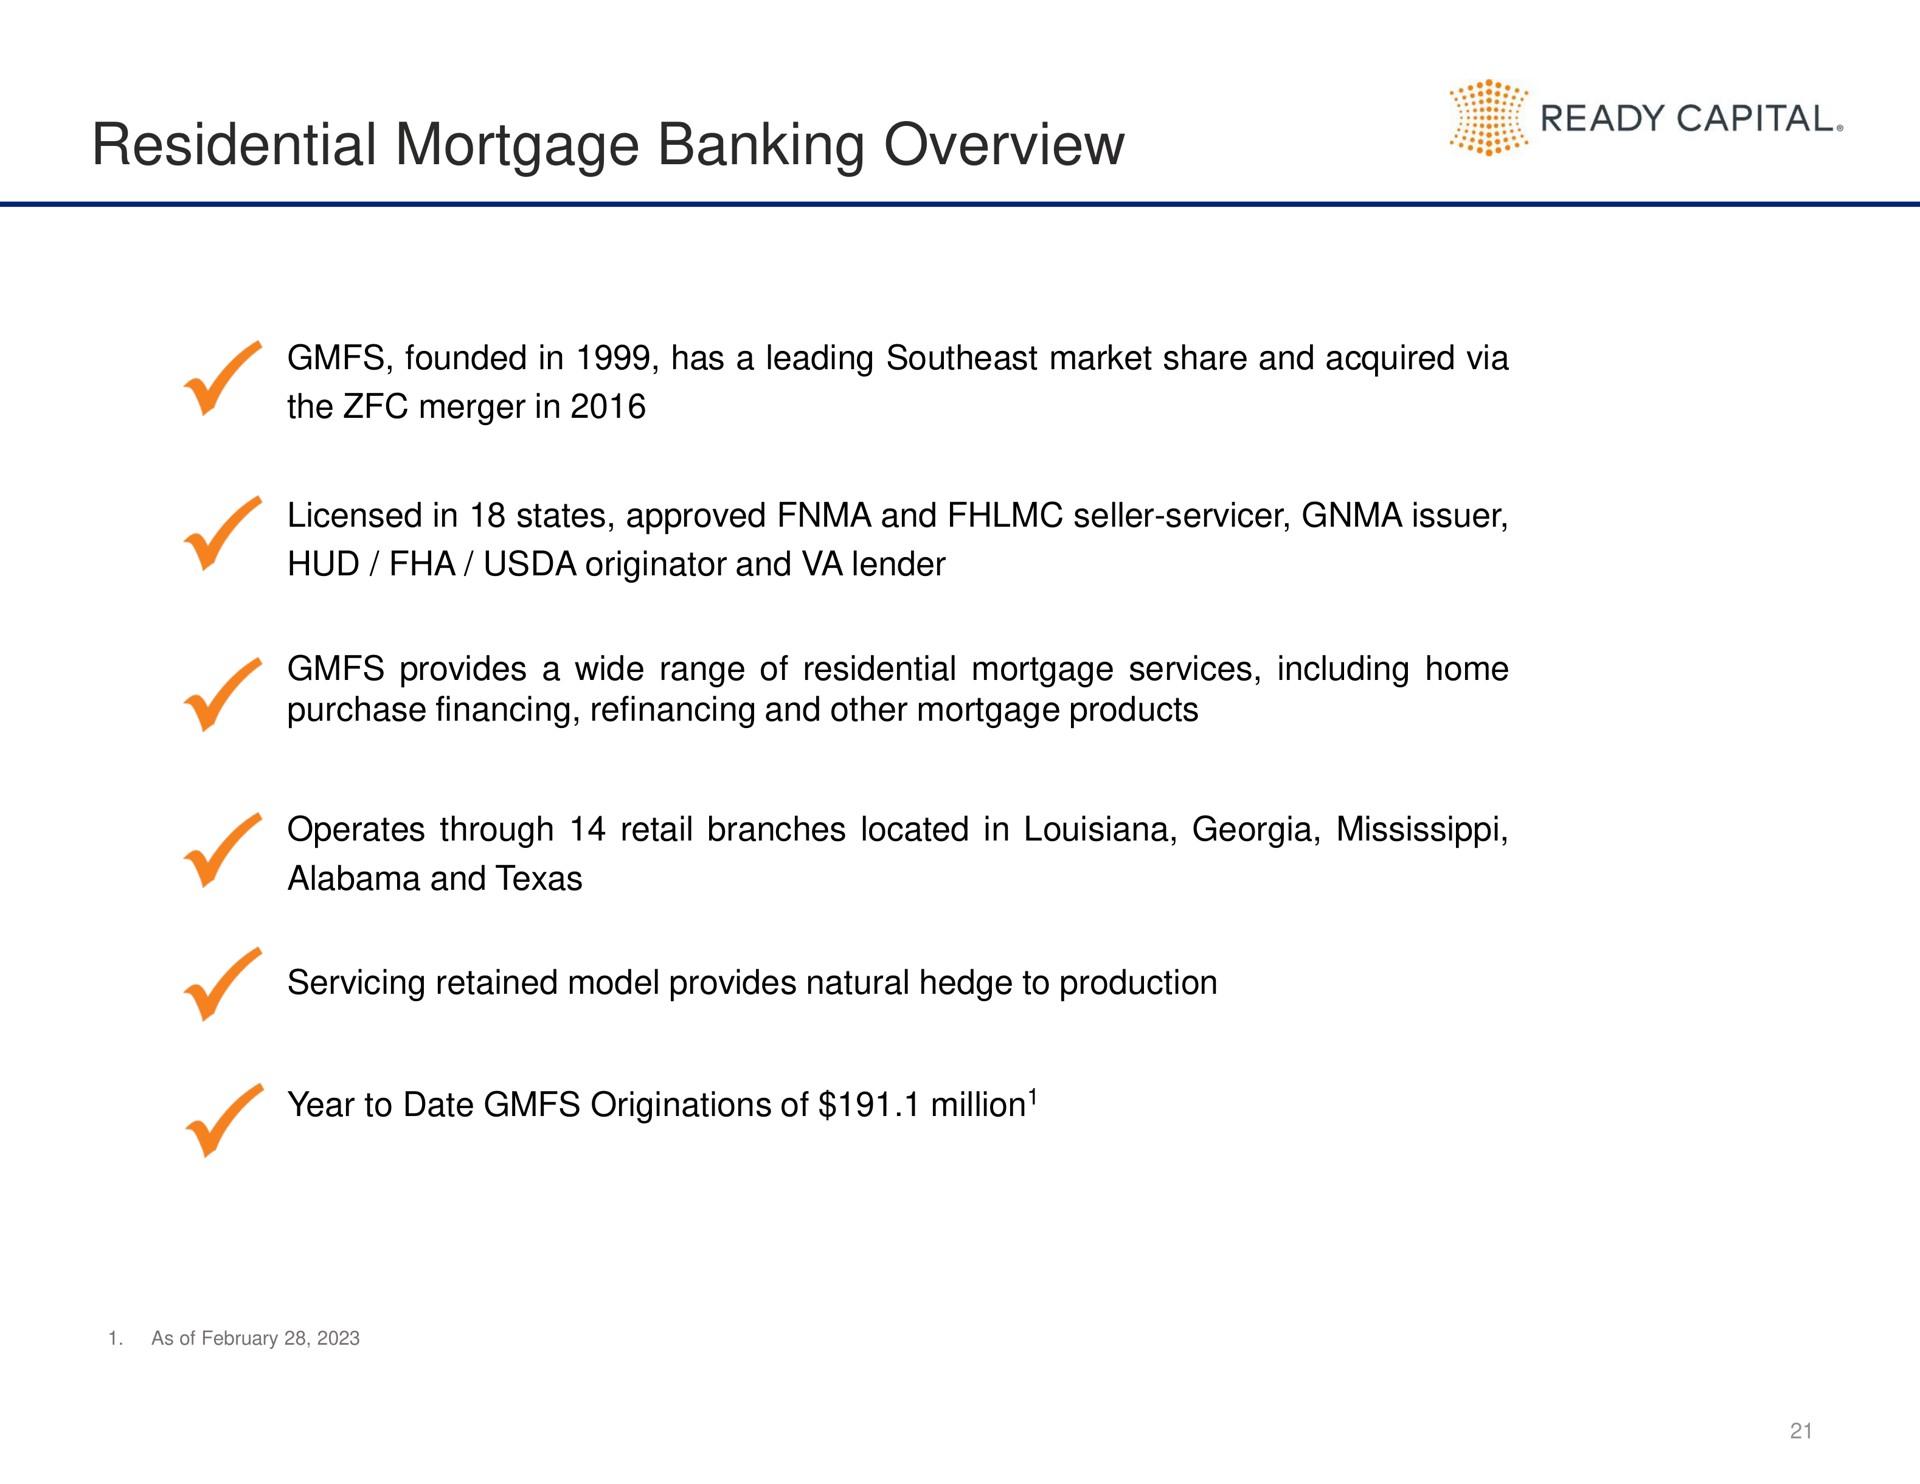 residential mortgage banking overview ready capital | Ready Capital